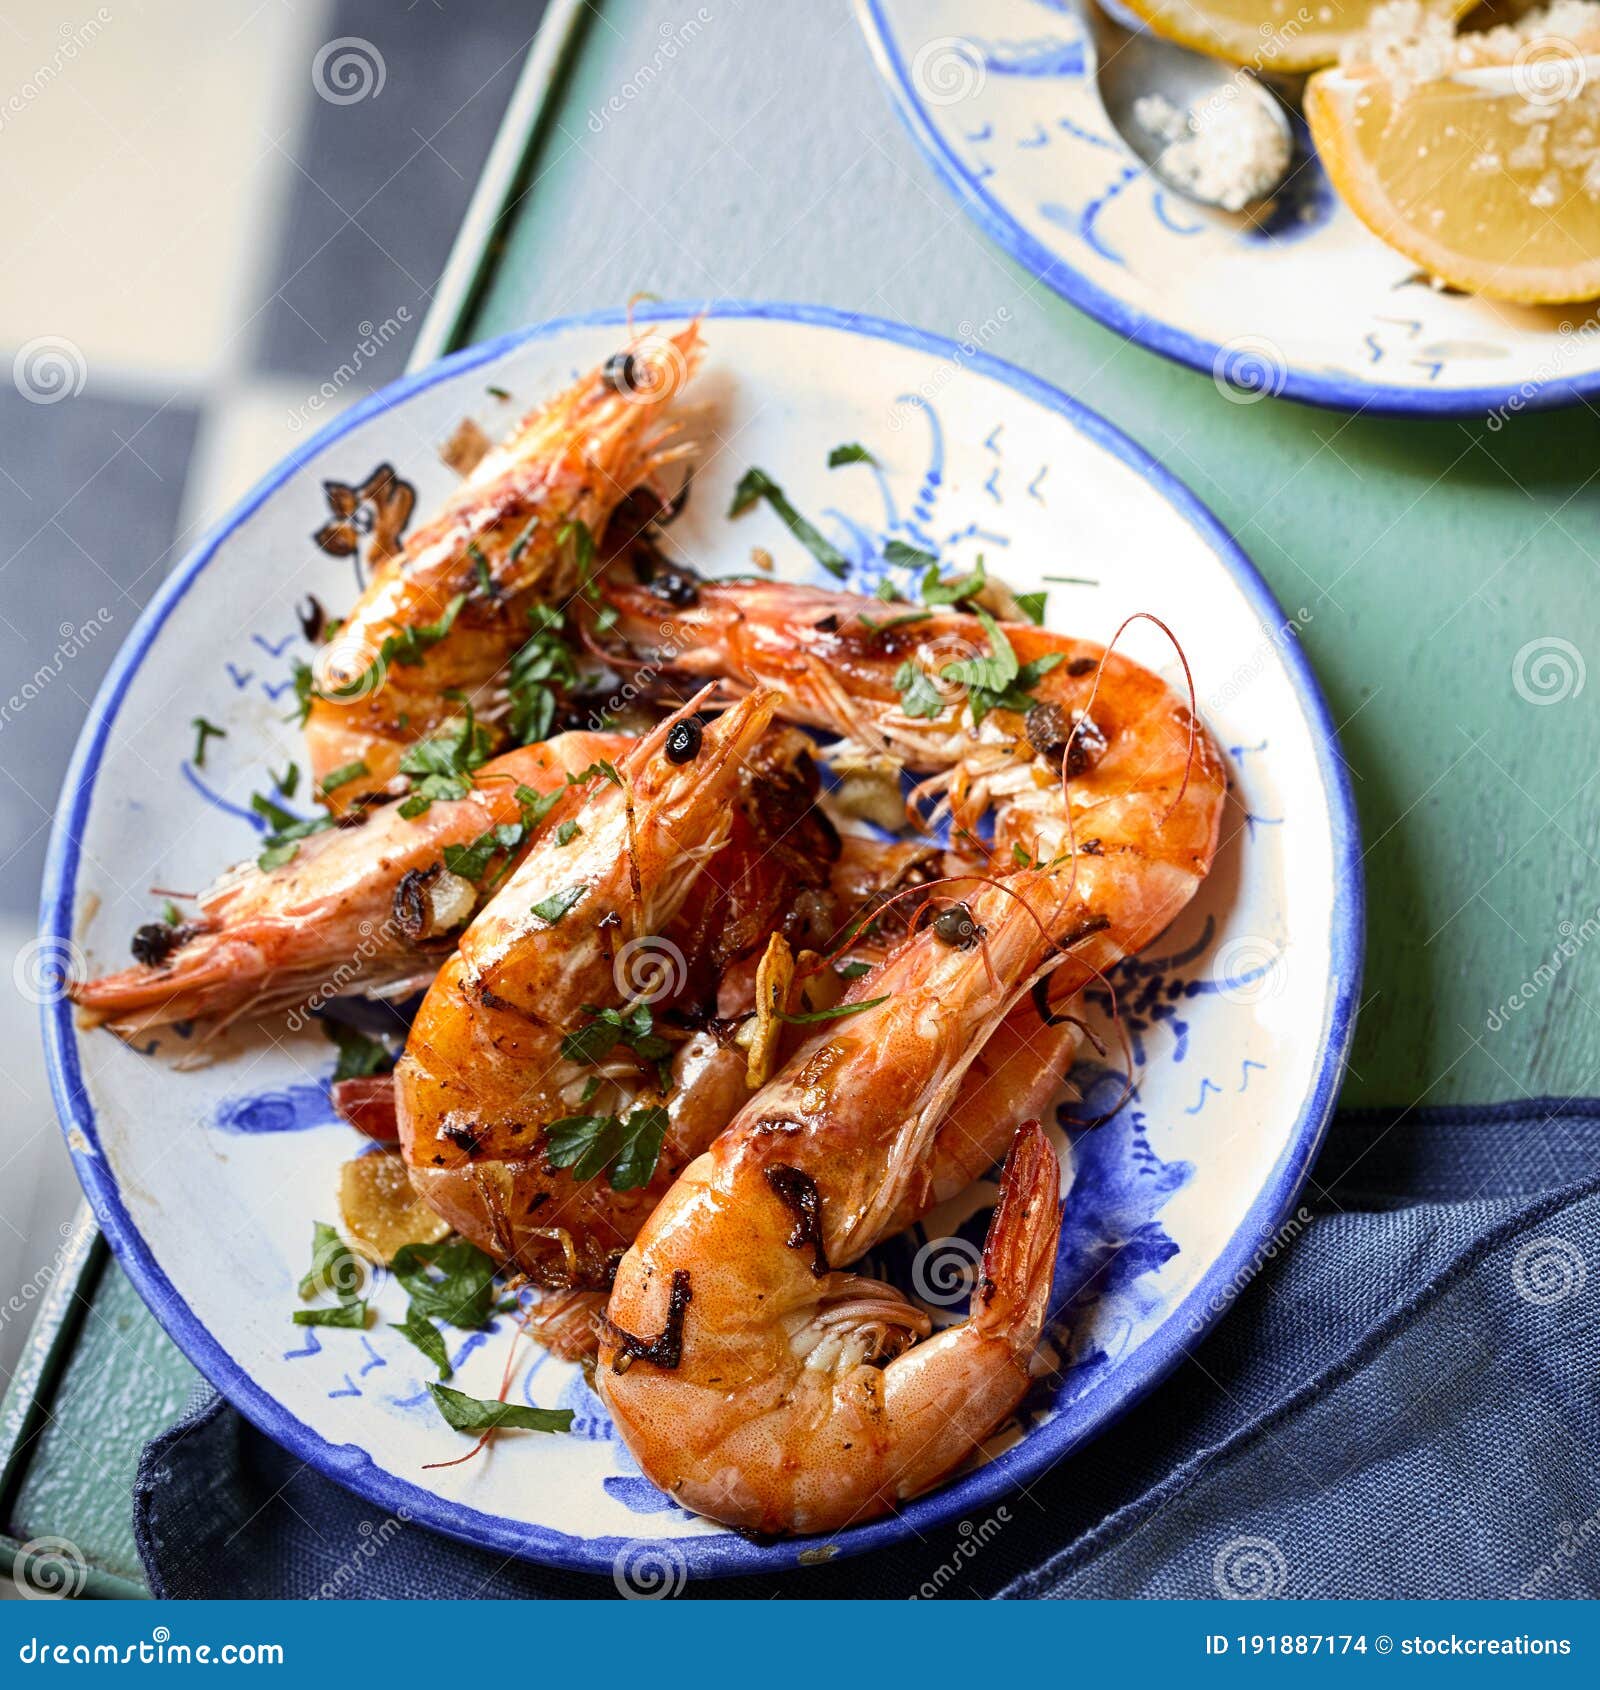 grilled whole pink prawns seasoned with herbs